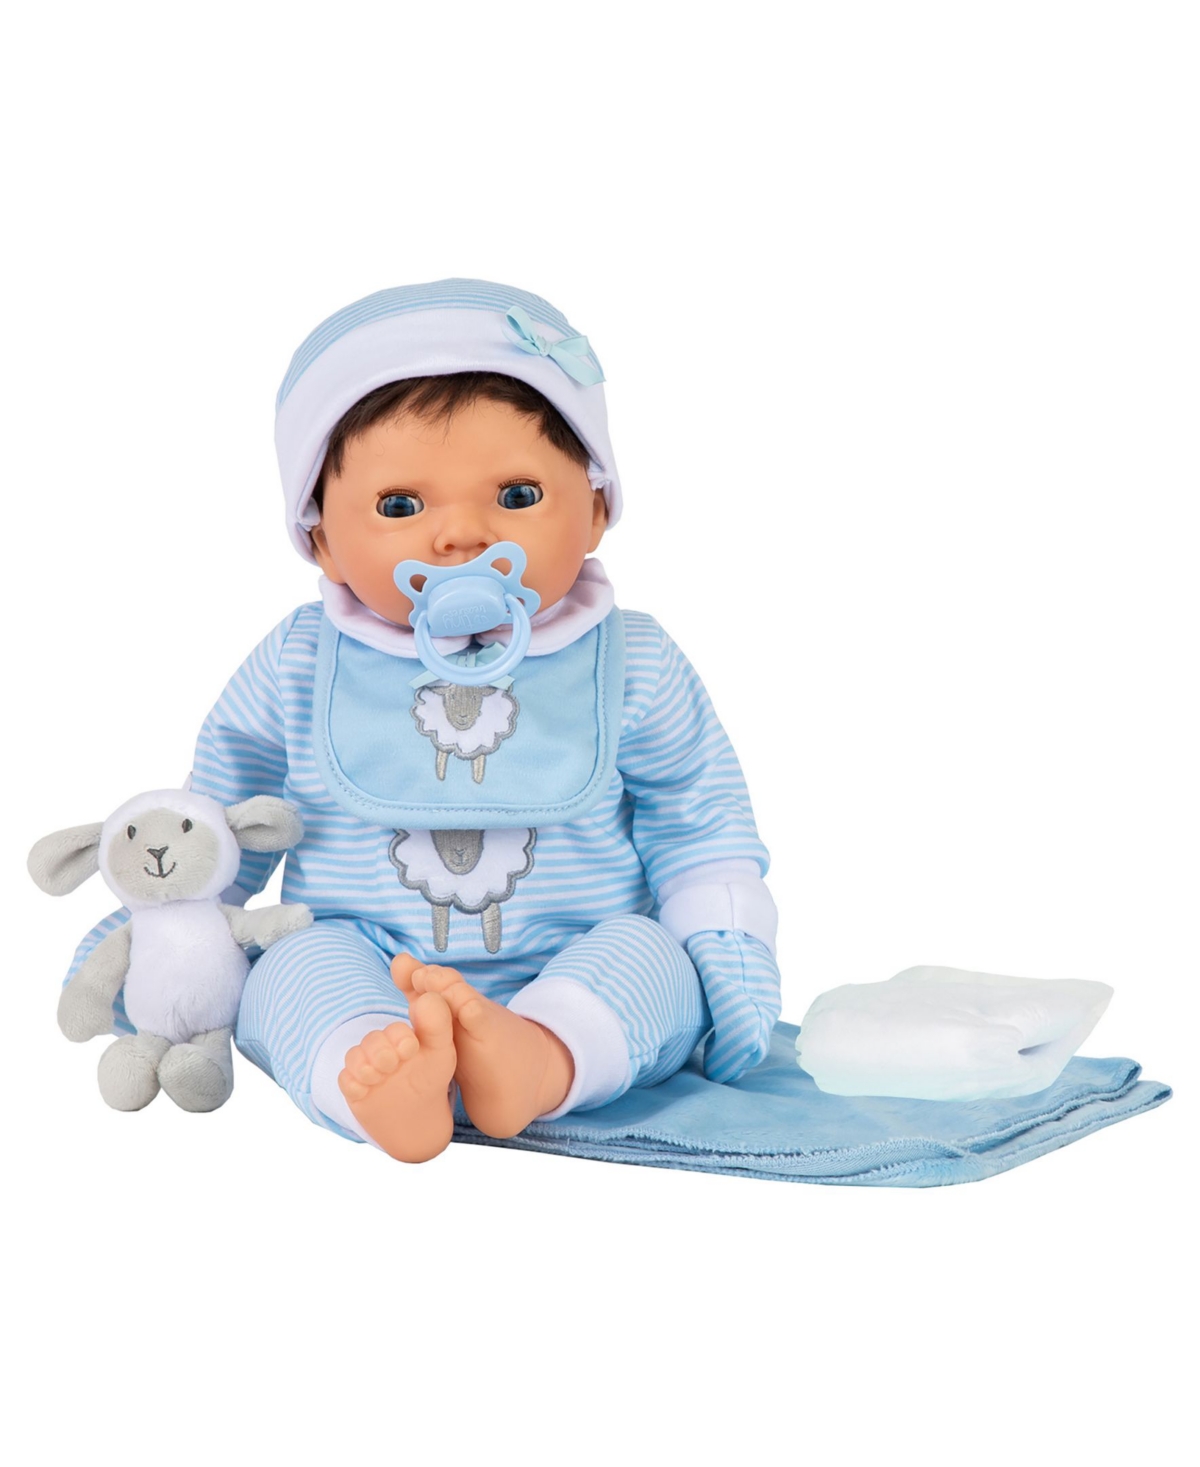 Redbox Tiny Treasures Toy Baby Doll With Layette Set In Multi